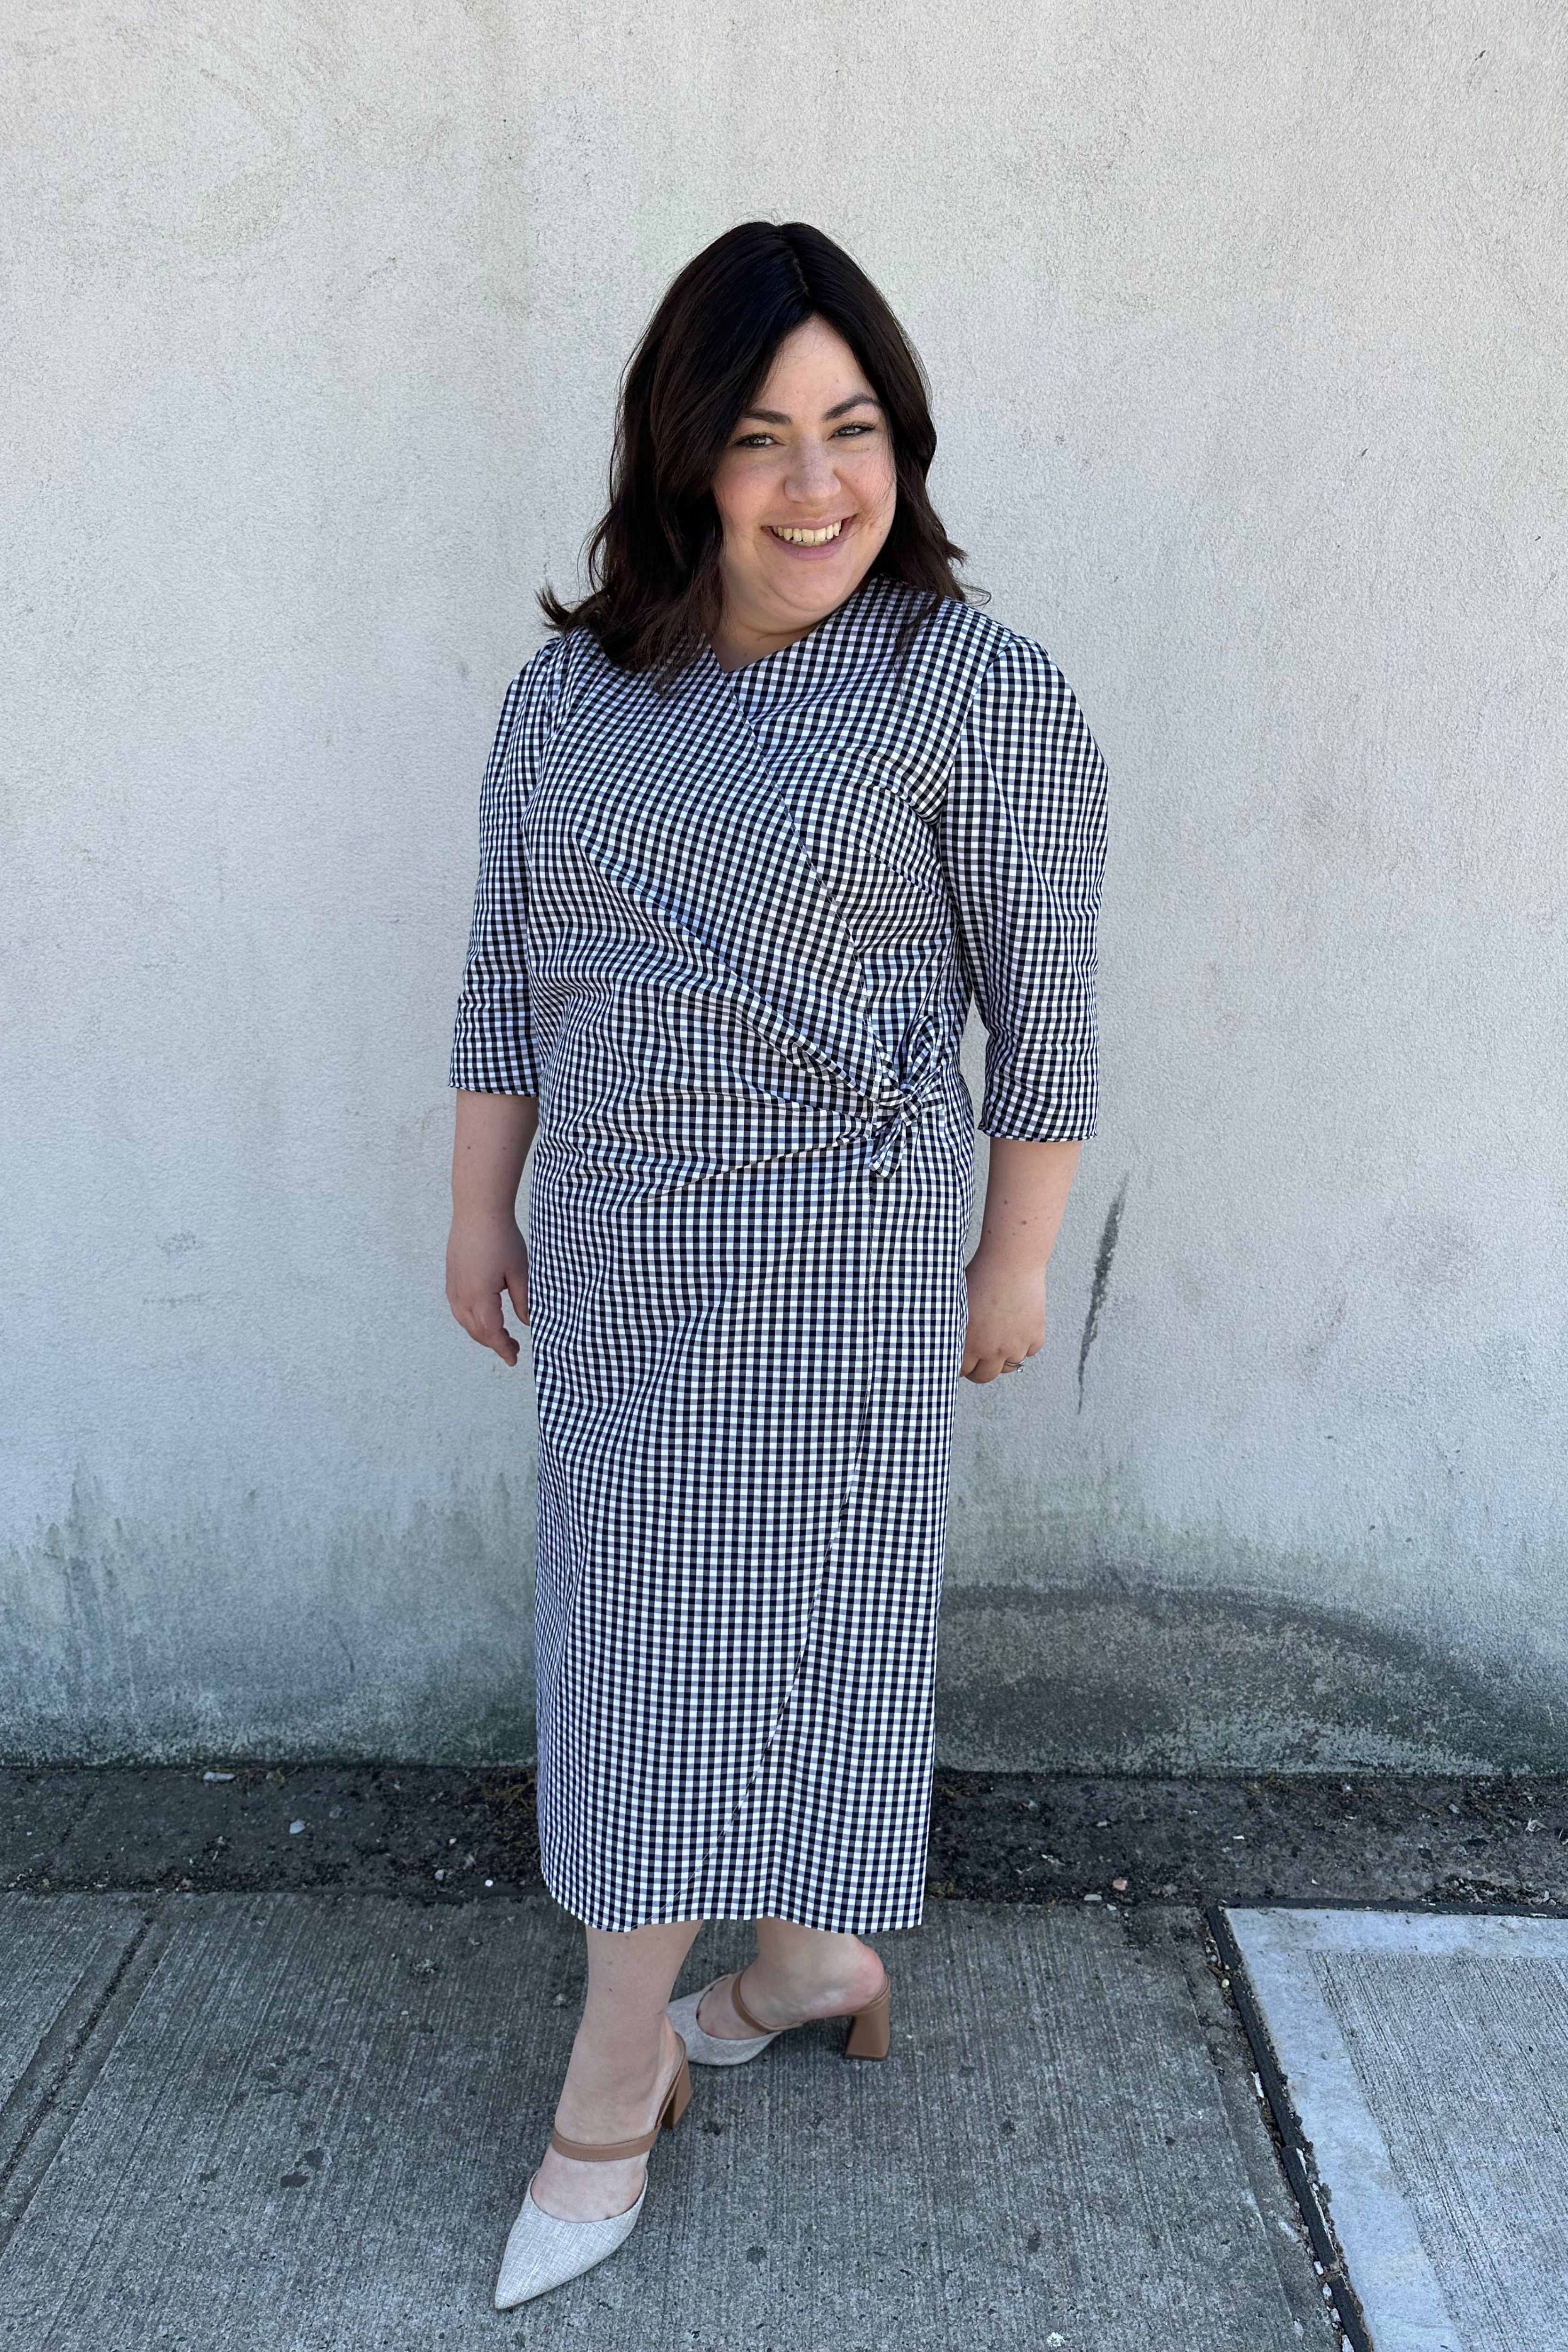 The "Wrap" Dress (Cotton Gingham)